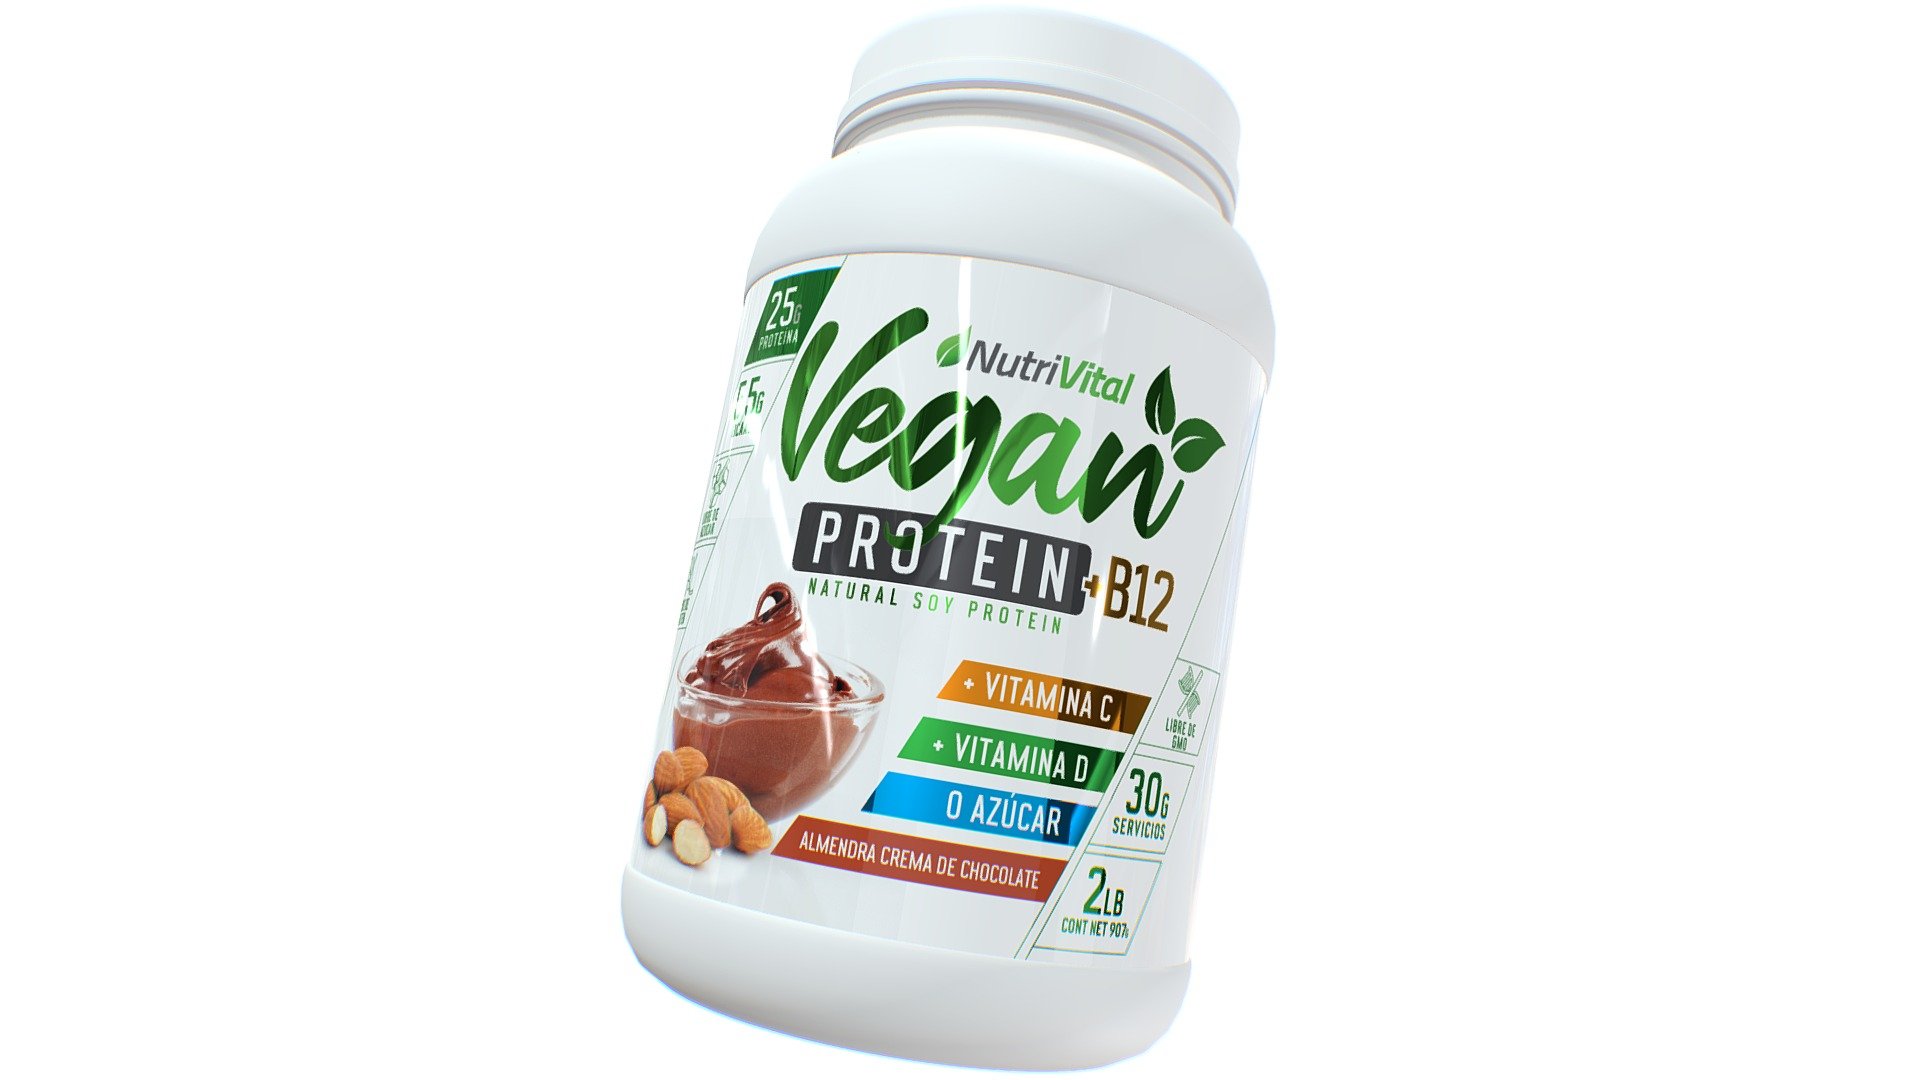 Vegan Protein AmbosLados v6 - 3D model by proyects 3d model